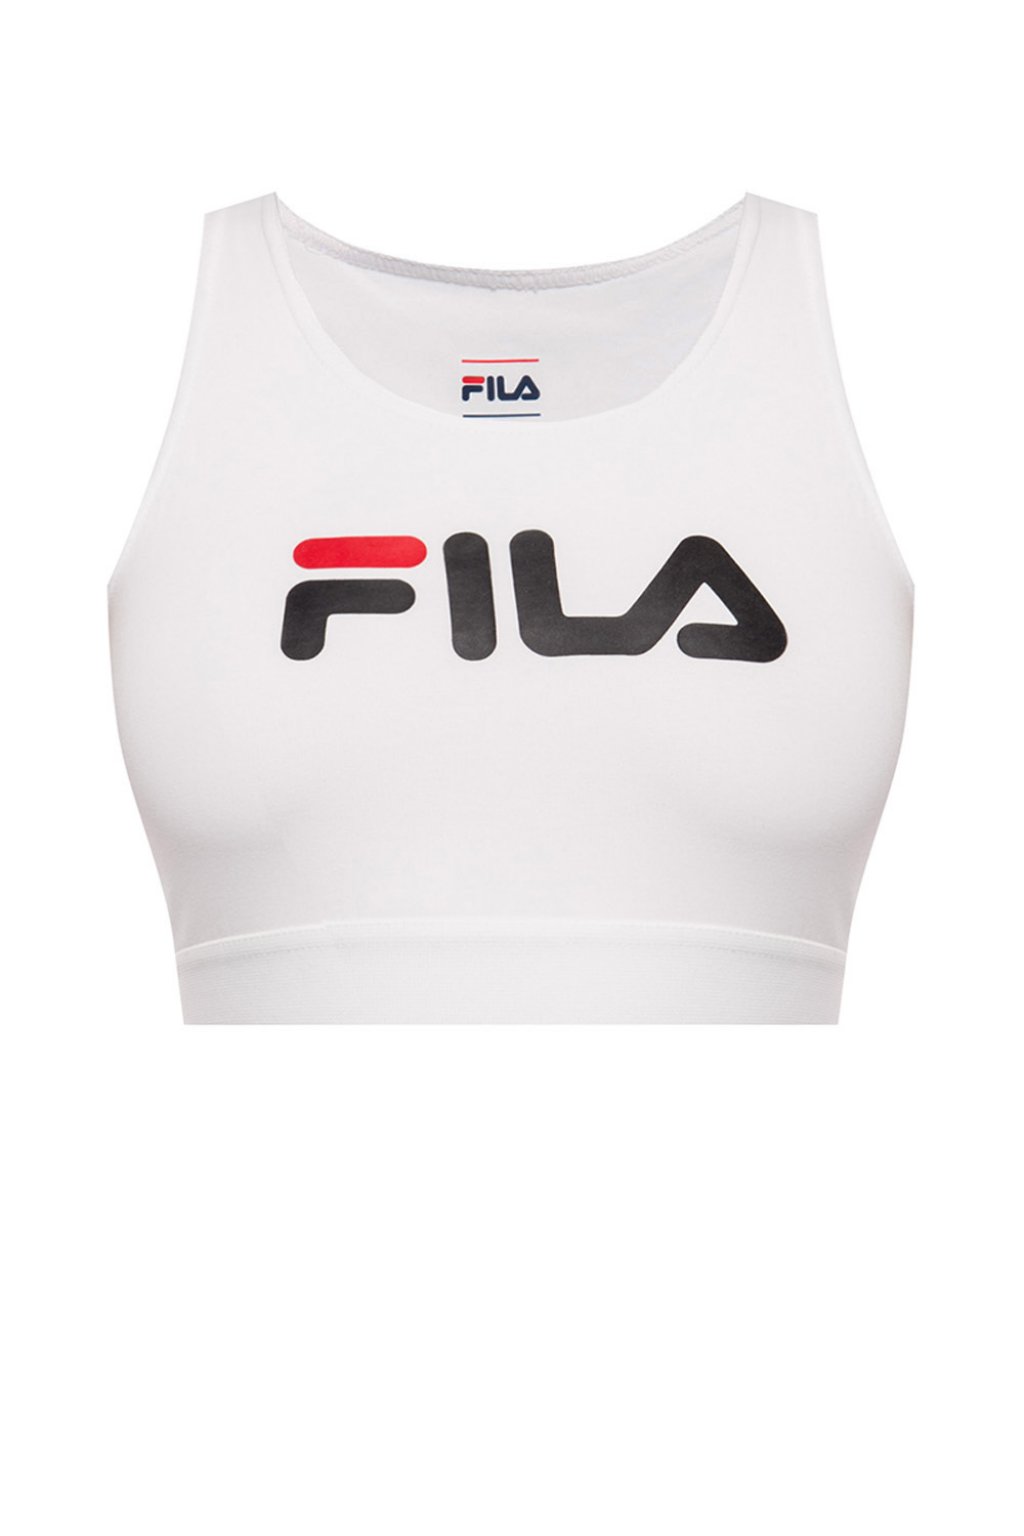 IetpShops MH - Sports bra with logo insoles Fila - insoles Fila Forerunner  18 Negras Mujer